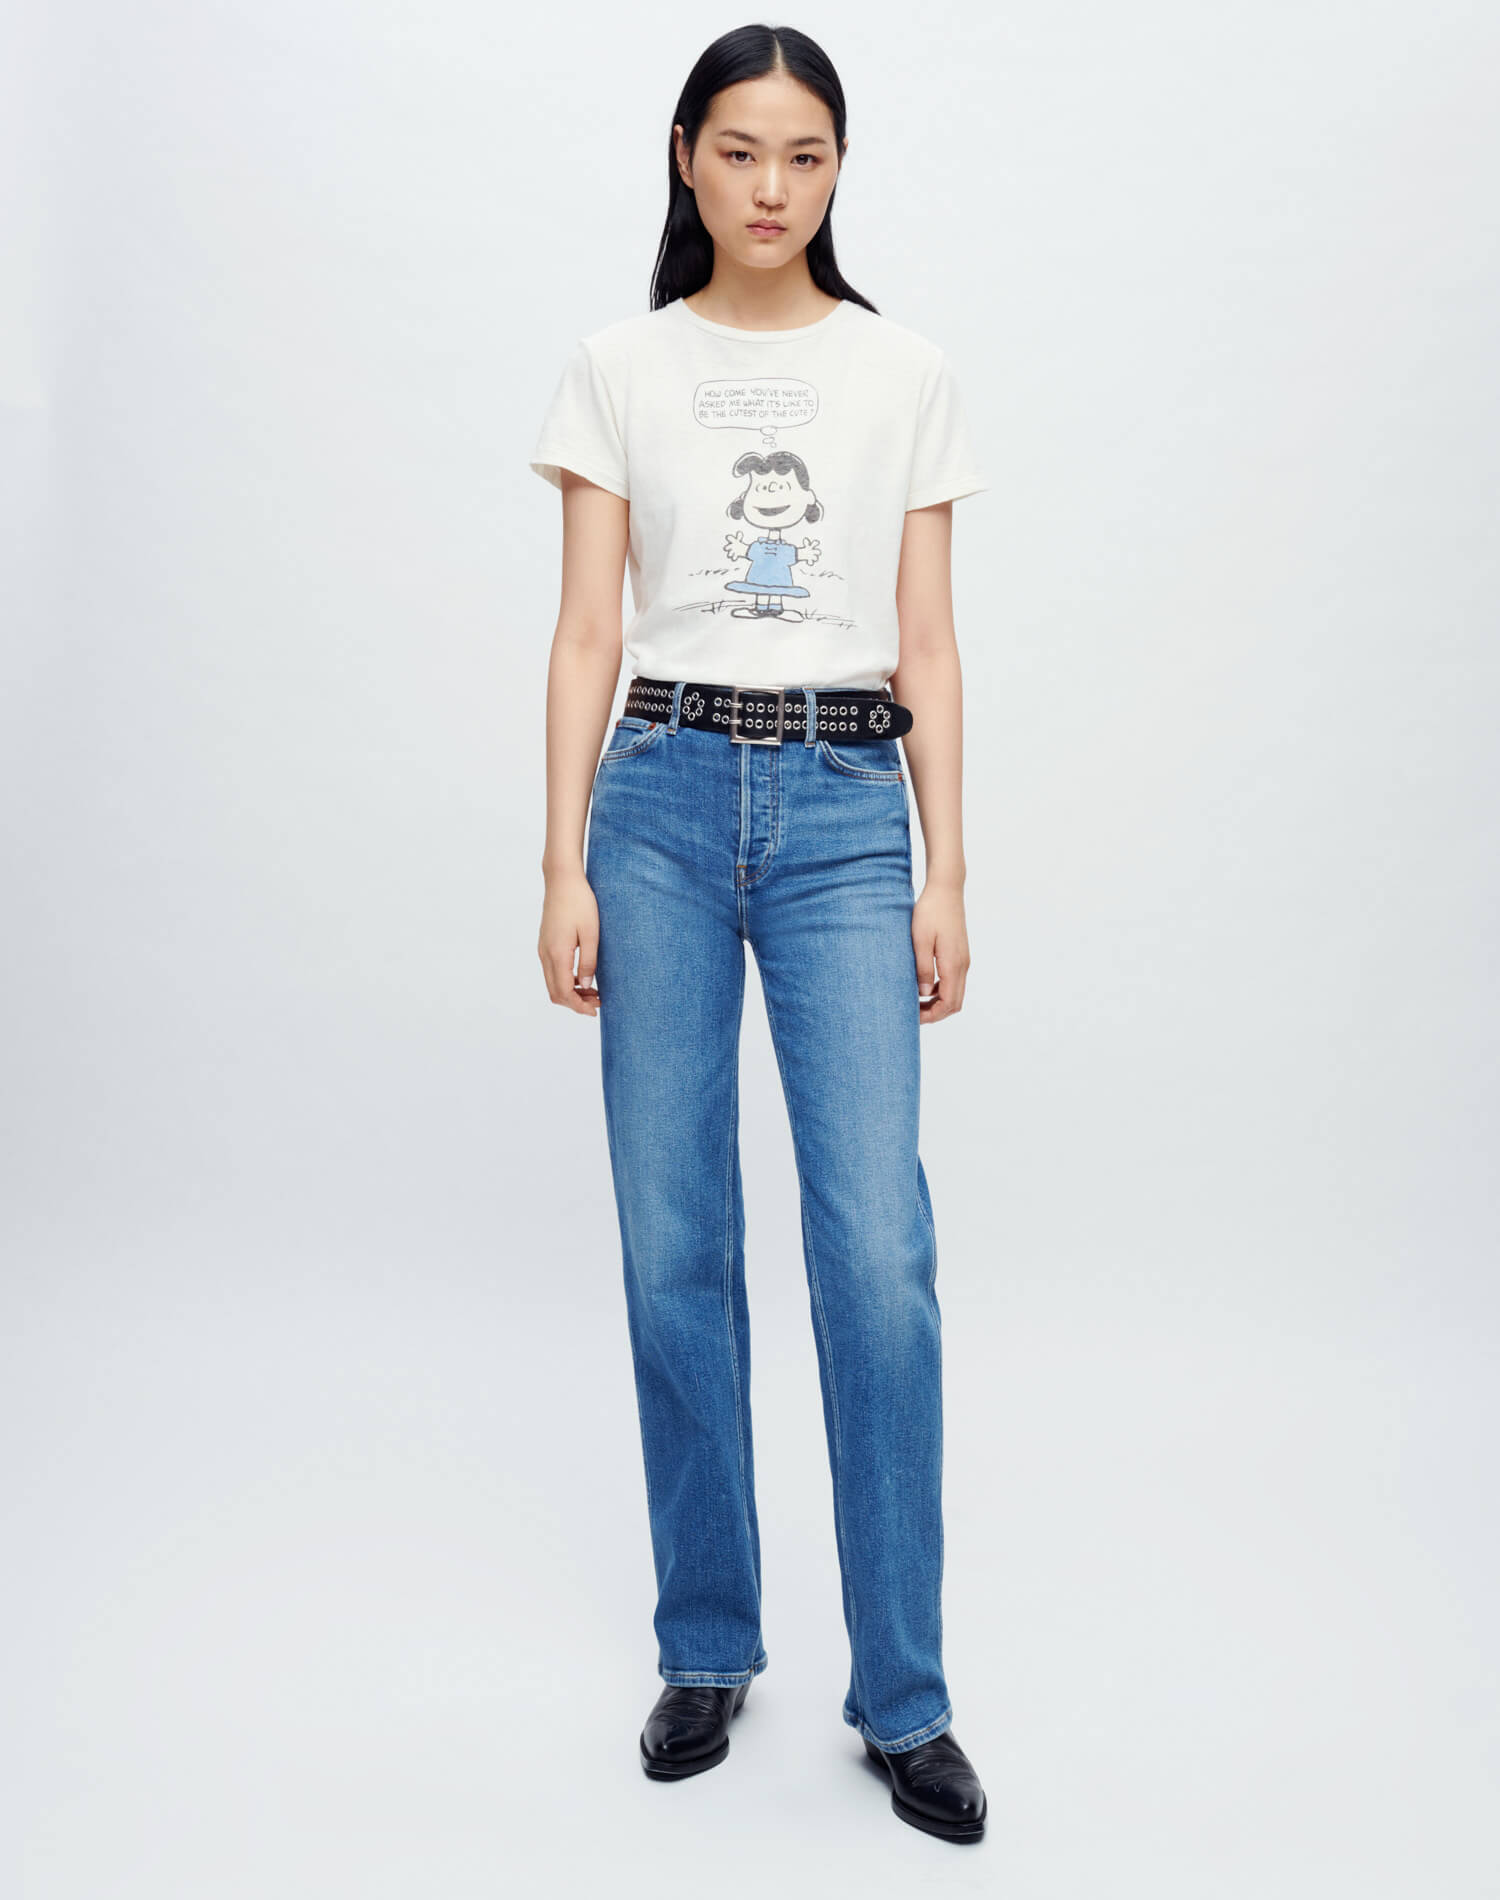 Classic Tee "Lucy Cute" - Vintage White